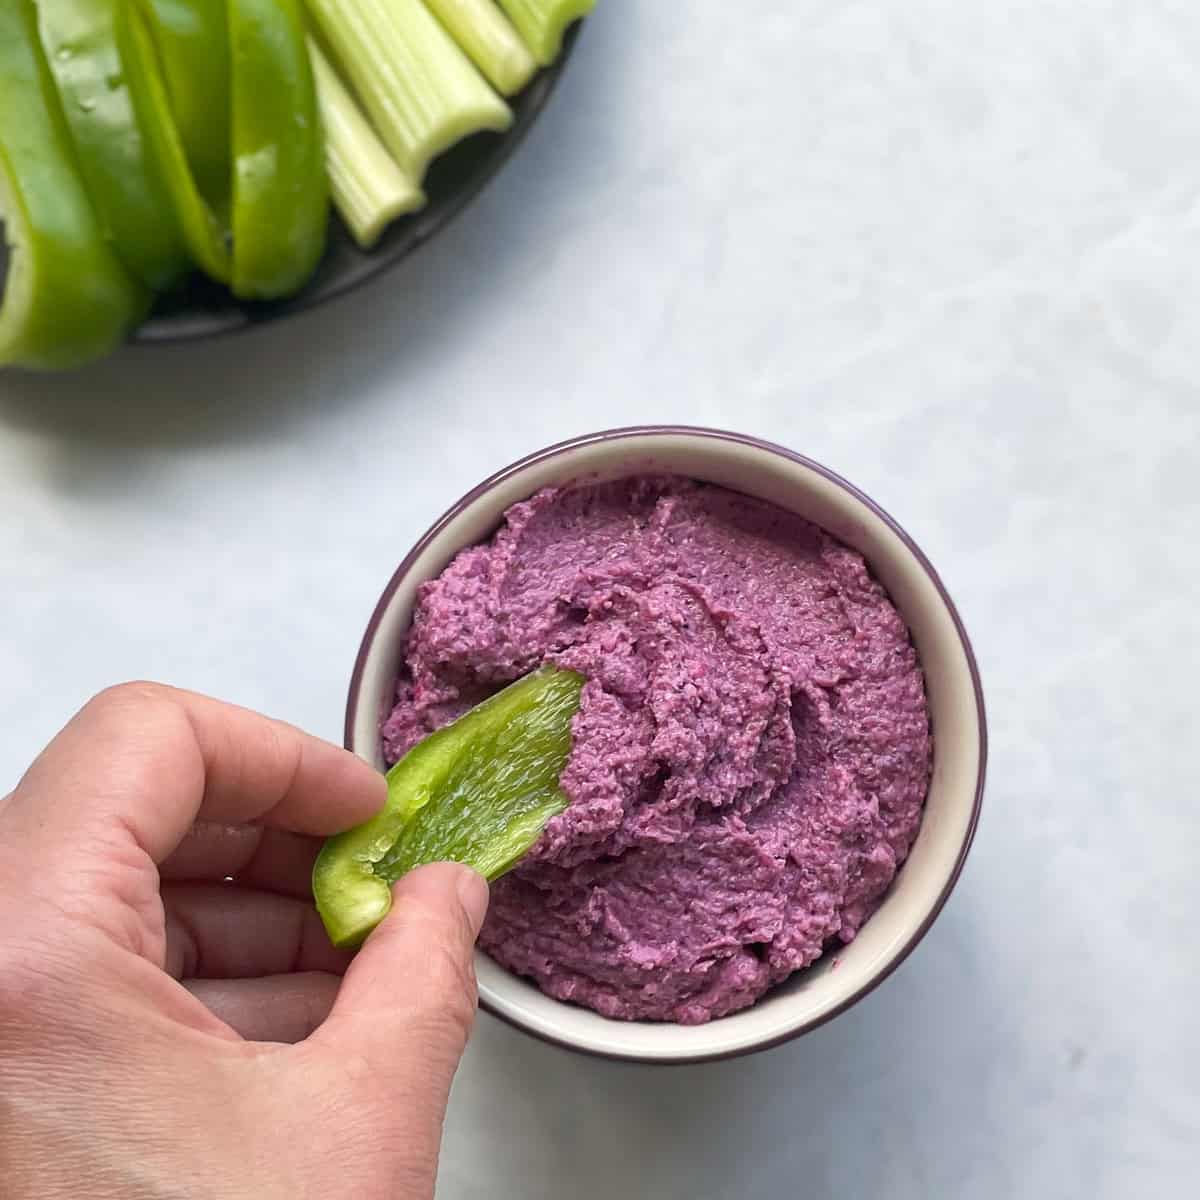 hand holding green pepper dipping into bowl of purple dip with plate of green pepper and celery.